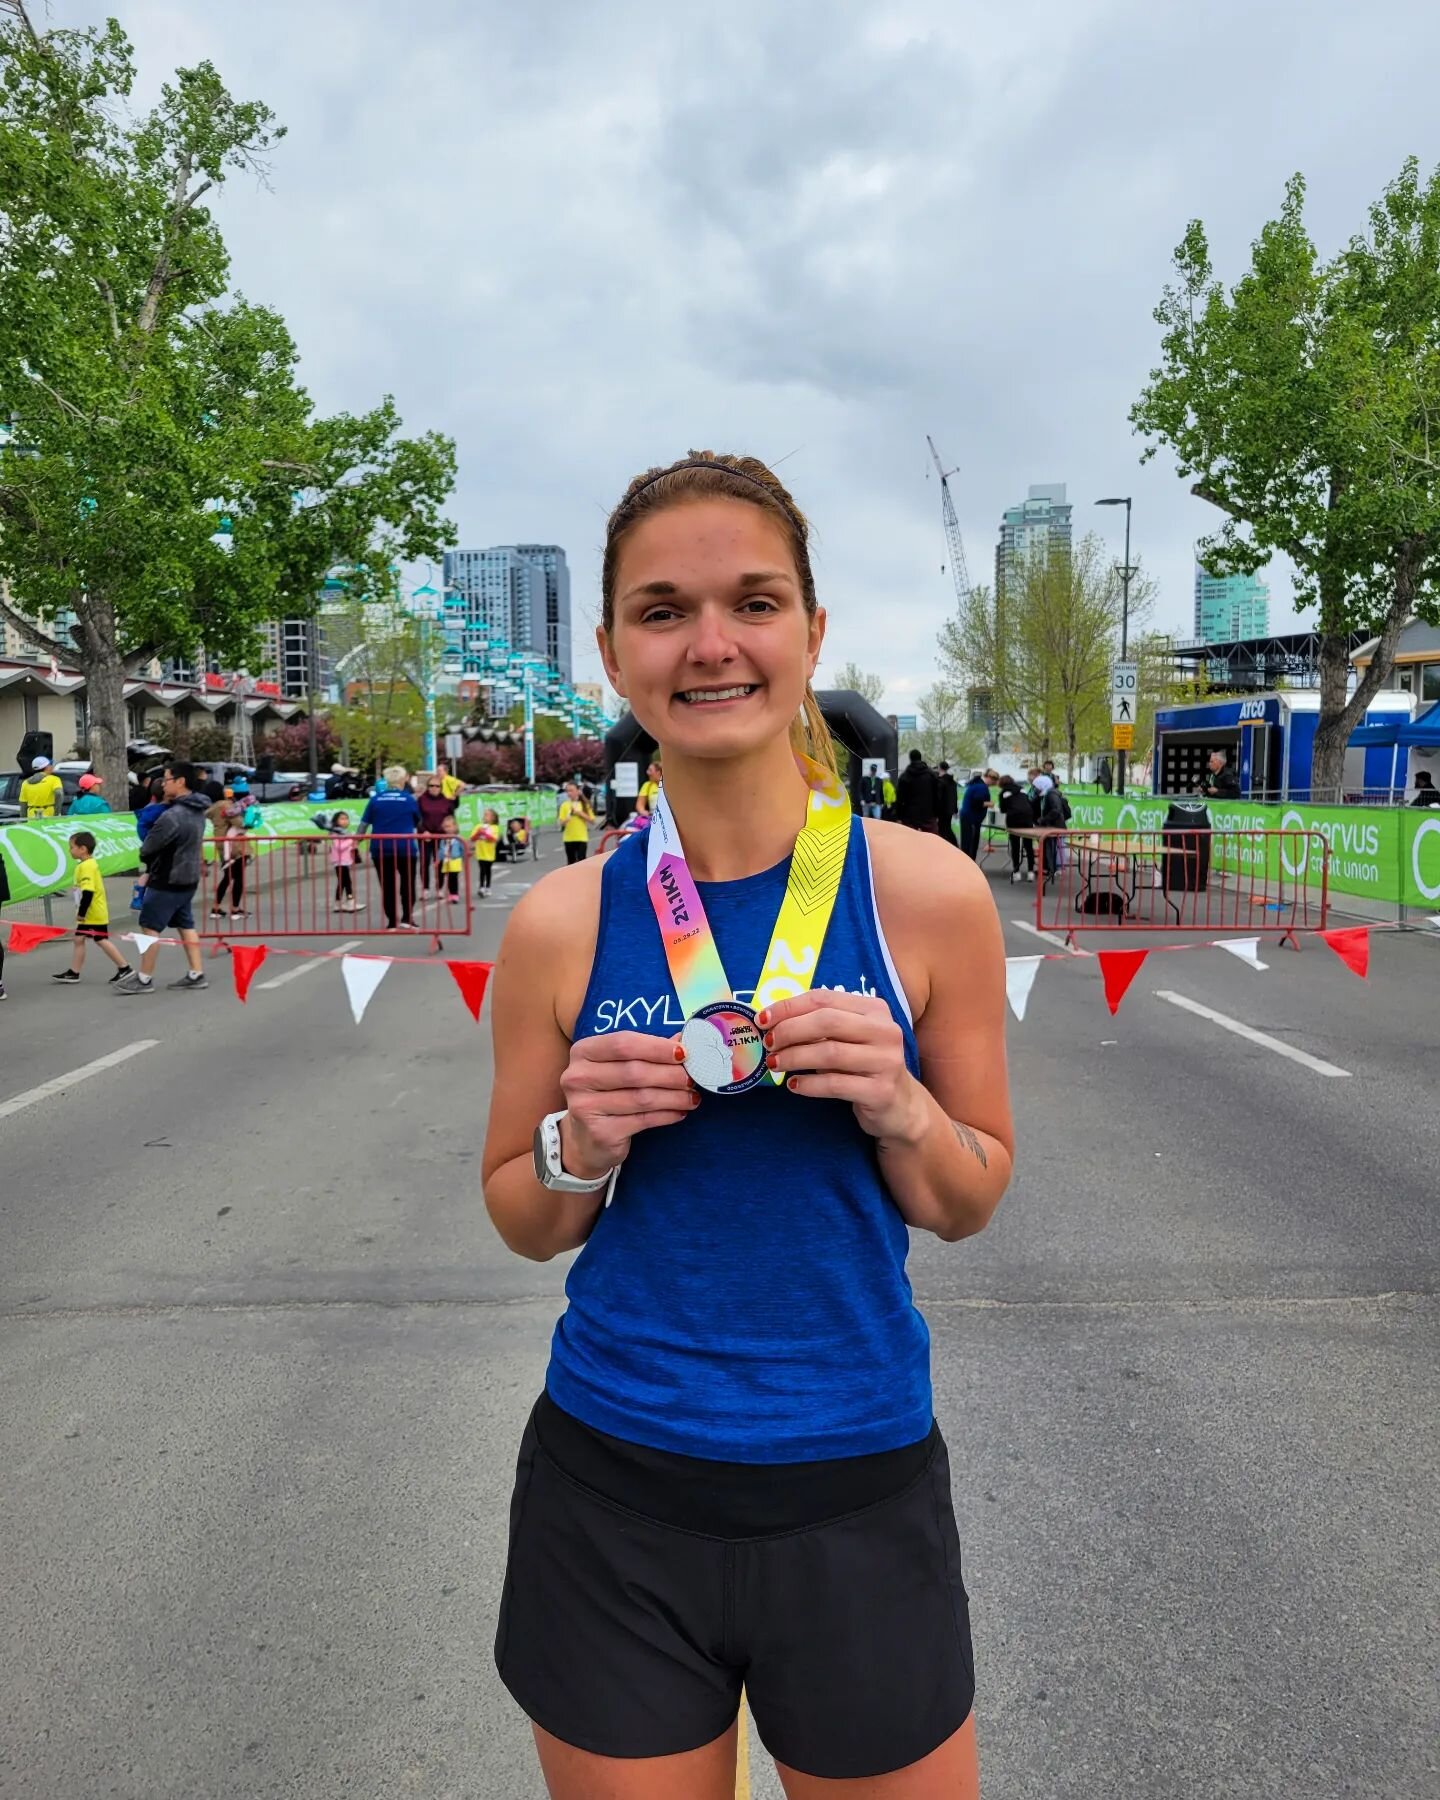 &quot;Sometimes the moments that challenge us, are the ones that define us&quot; - Deena Kastor. 
.
I had some time to reflect on sundays race. I made a tough hard BUT smart decision during Sundays race at the @calgarymarathon. My build and training 